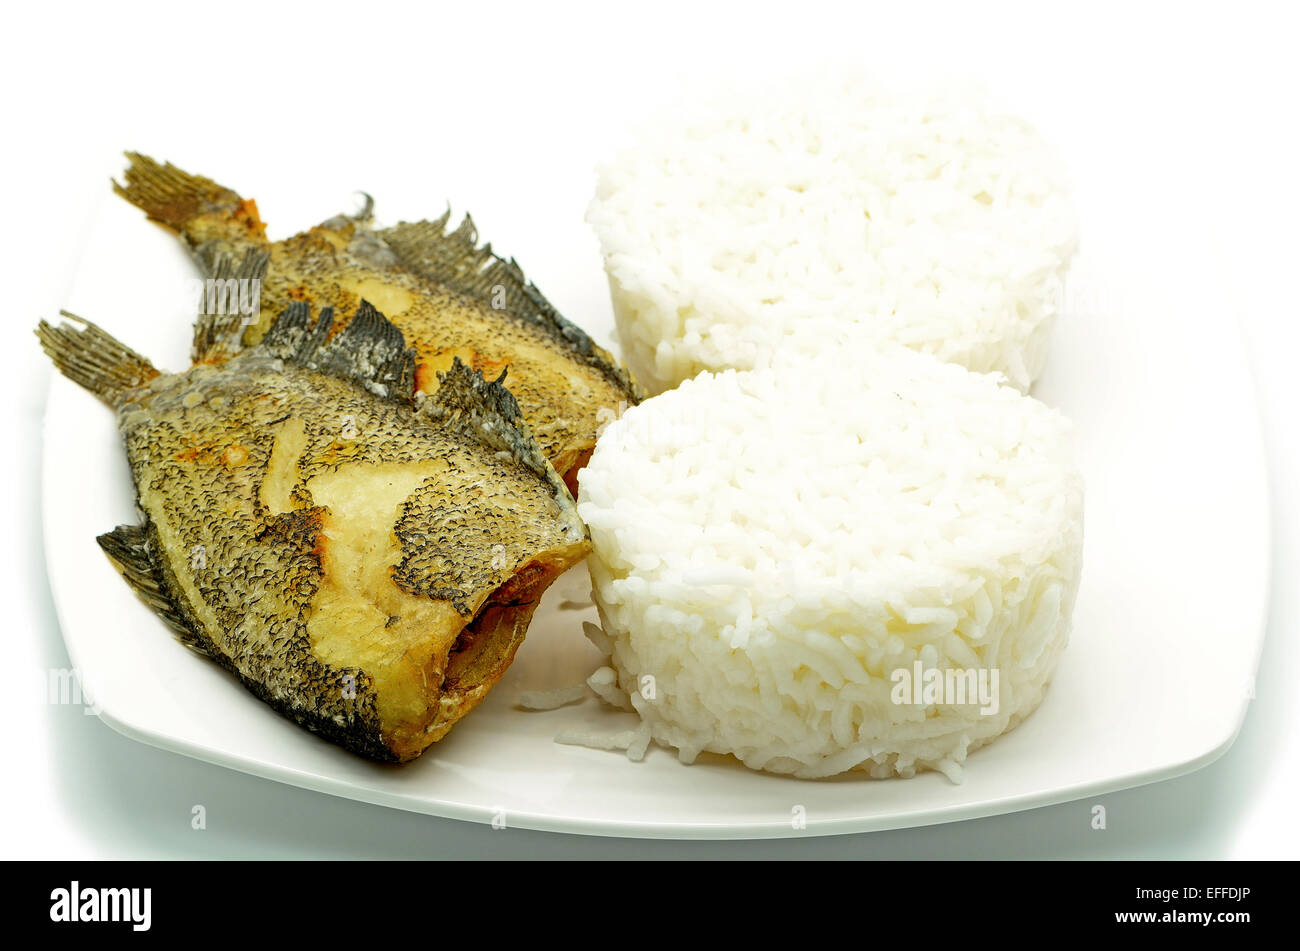 Deep fried 'Salid' fish, Snake Skin Gourami (Trichogaster pectoralis) with steamed rice Stock Photo